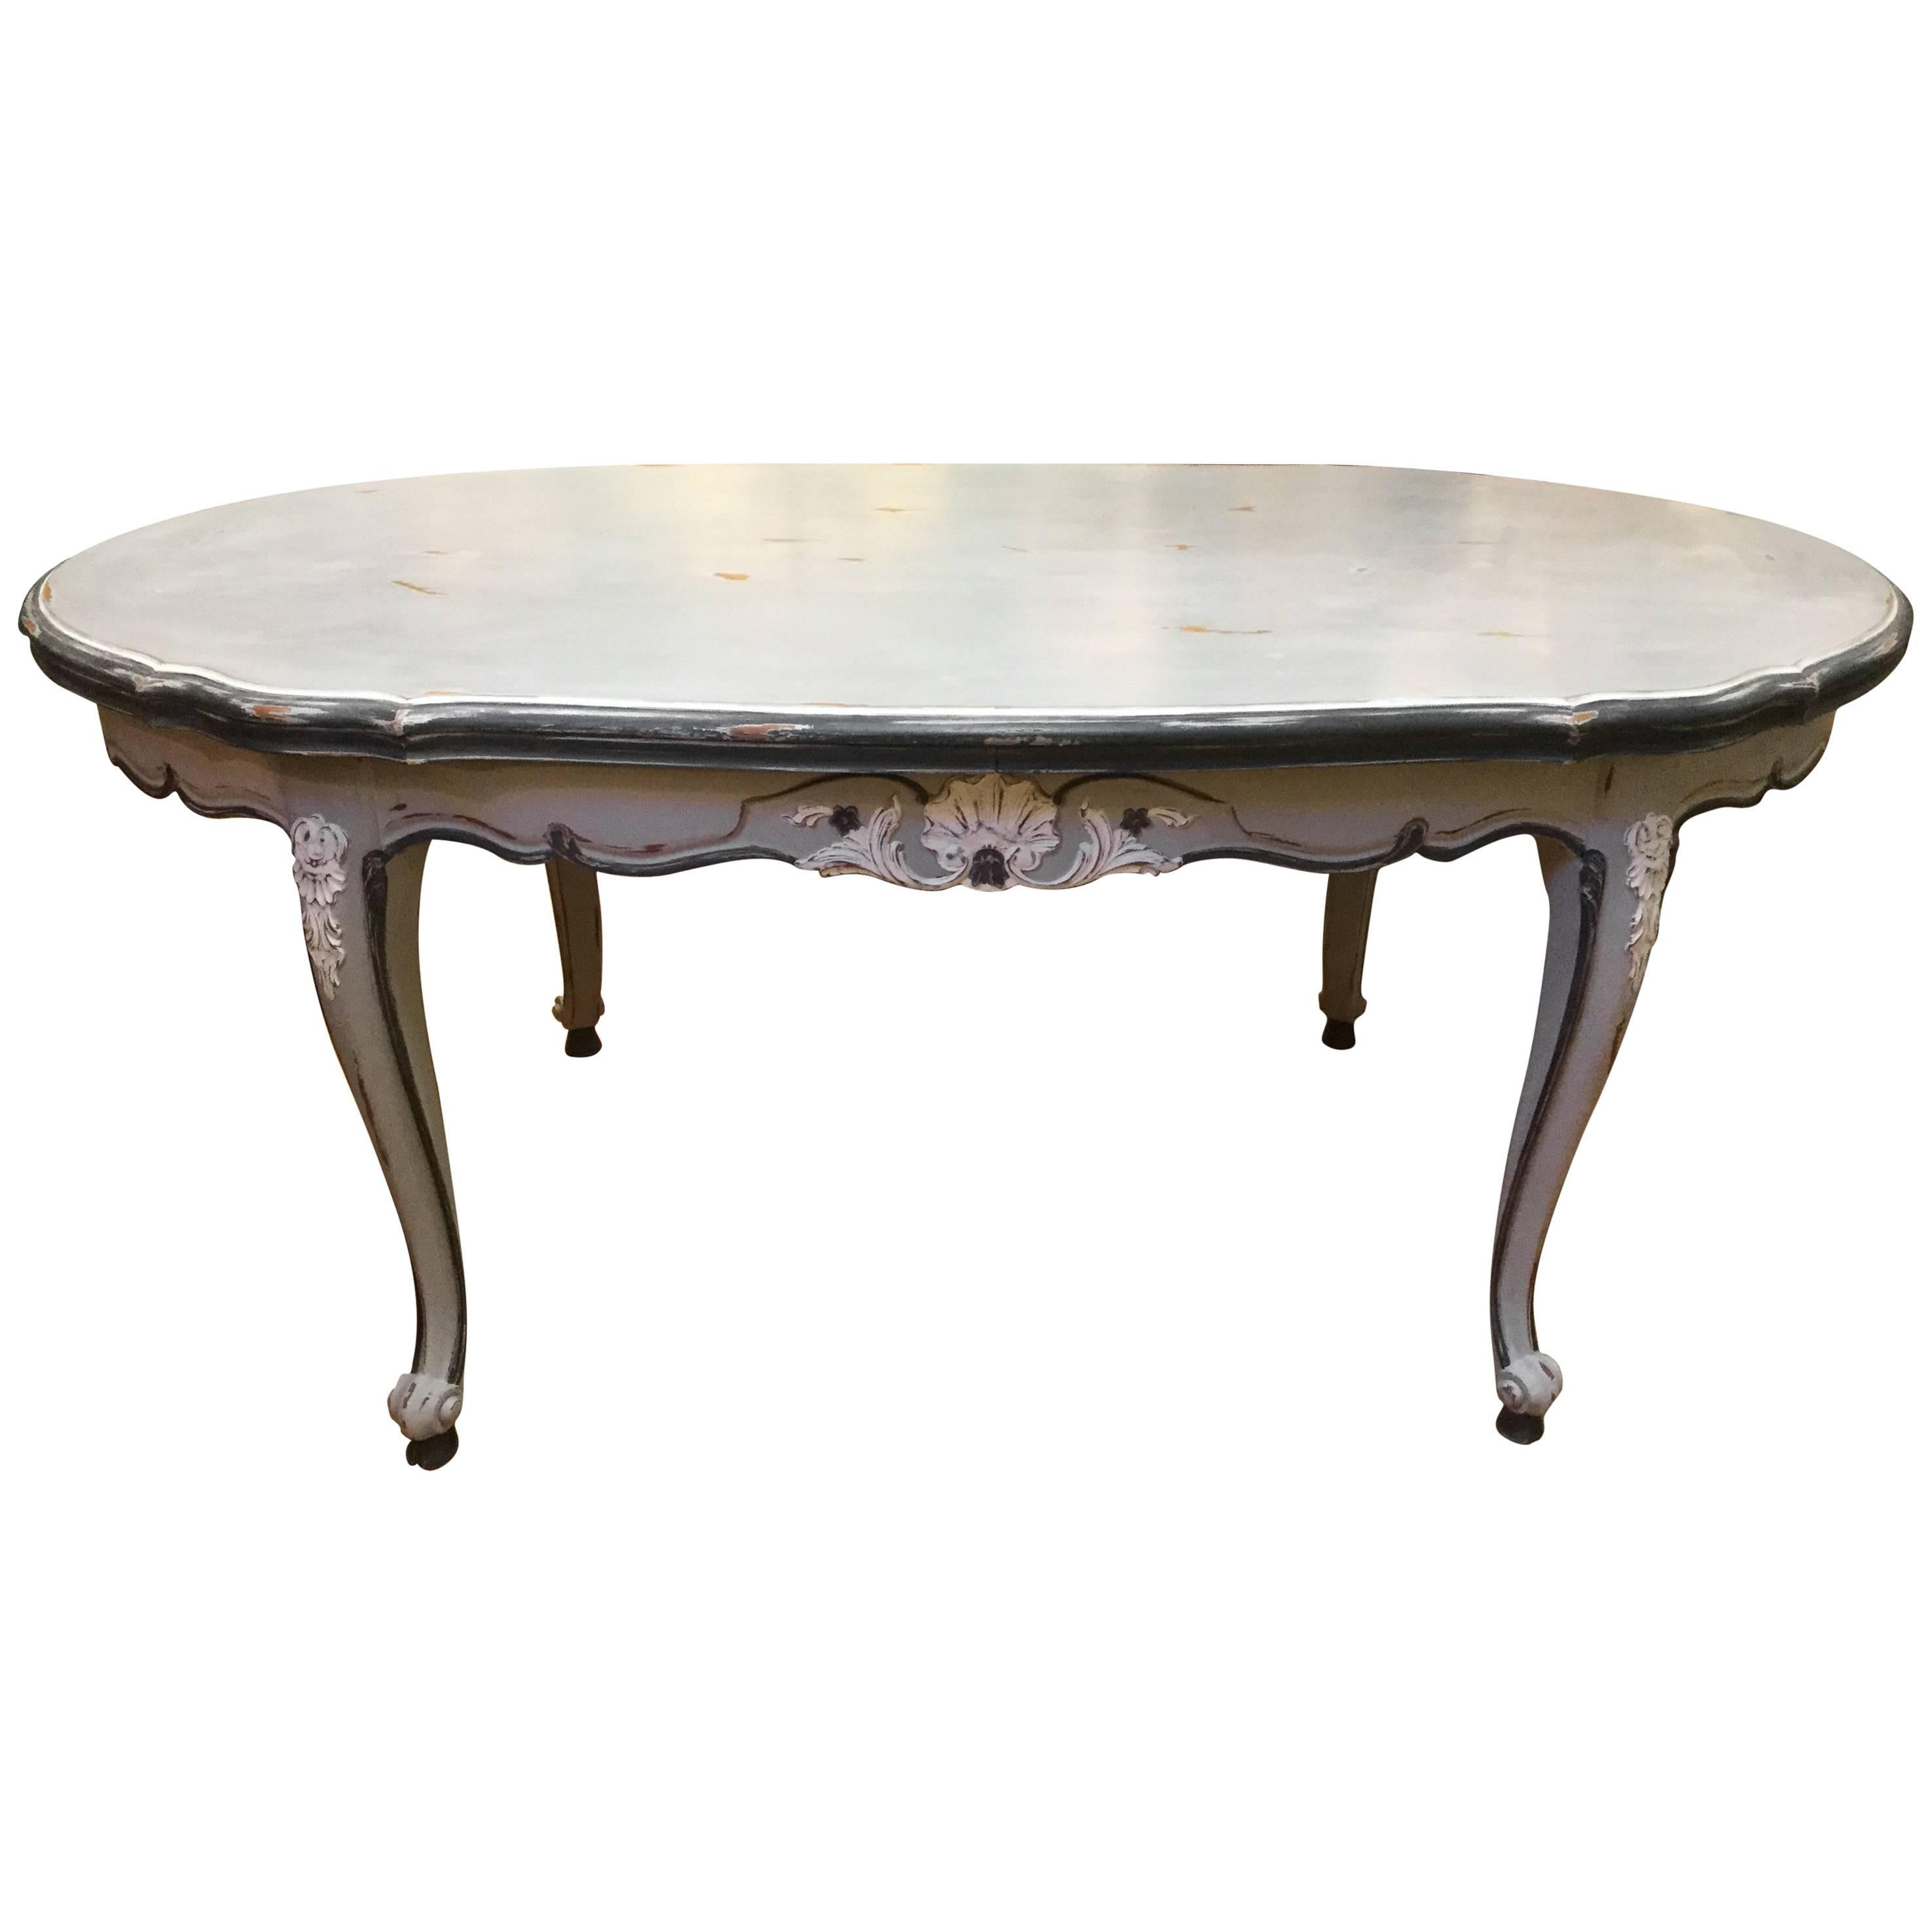 Lovely Louis XV Style Painted Oval Dining Table with Leaves